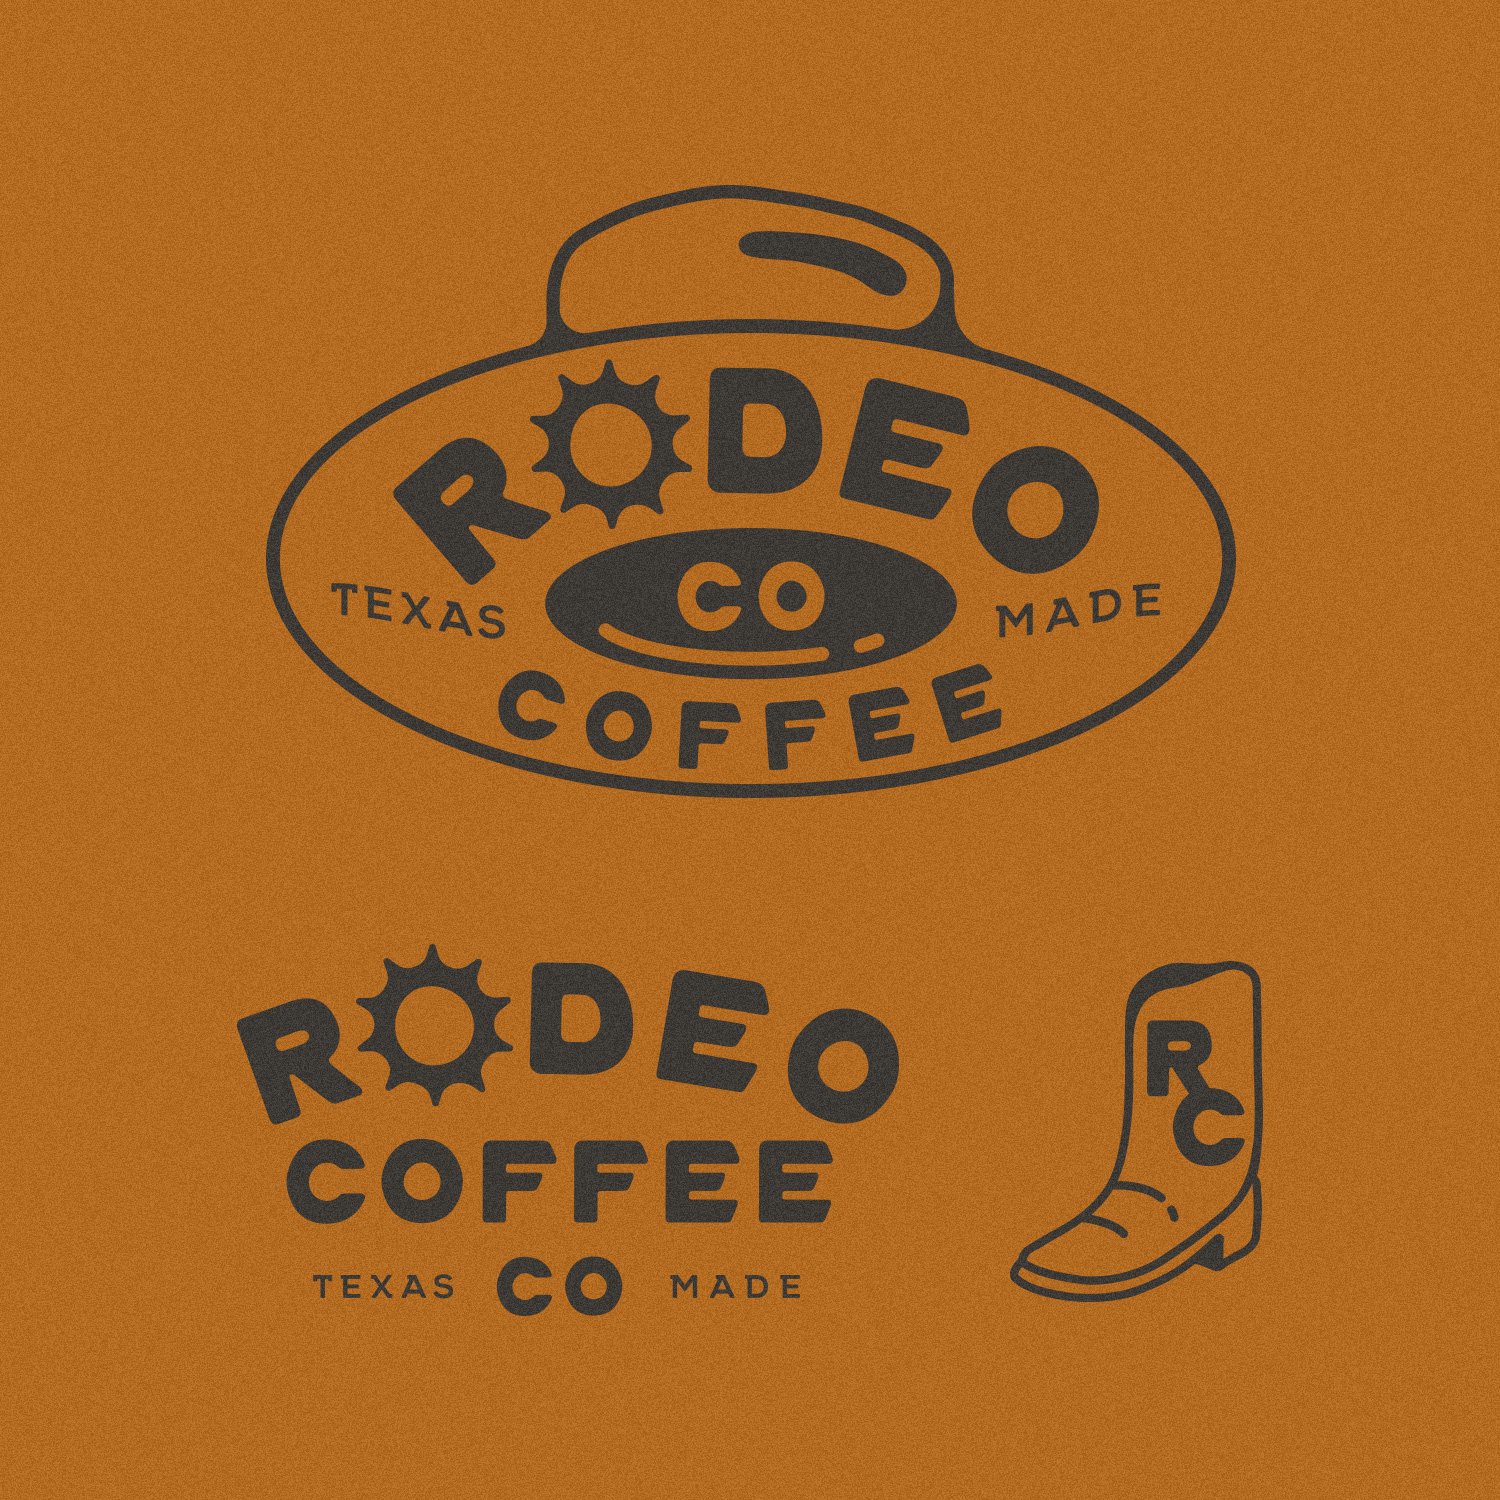  Rodeo Coffee Co logo marks and designs by Cactus Country. 